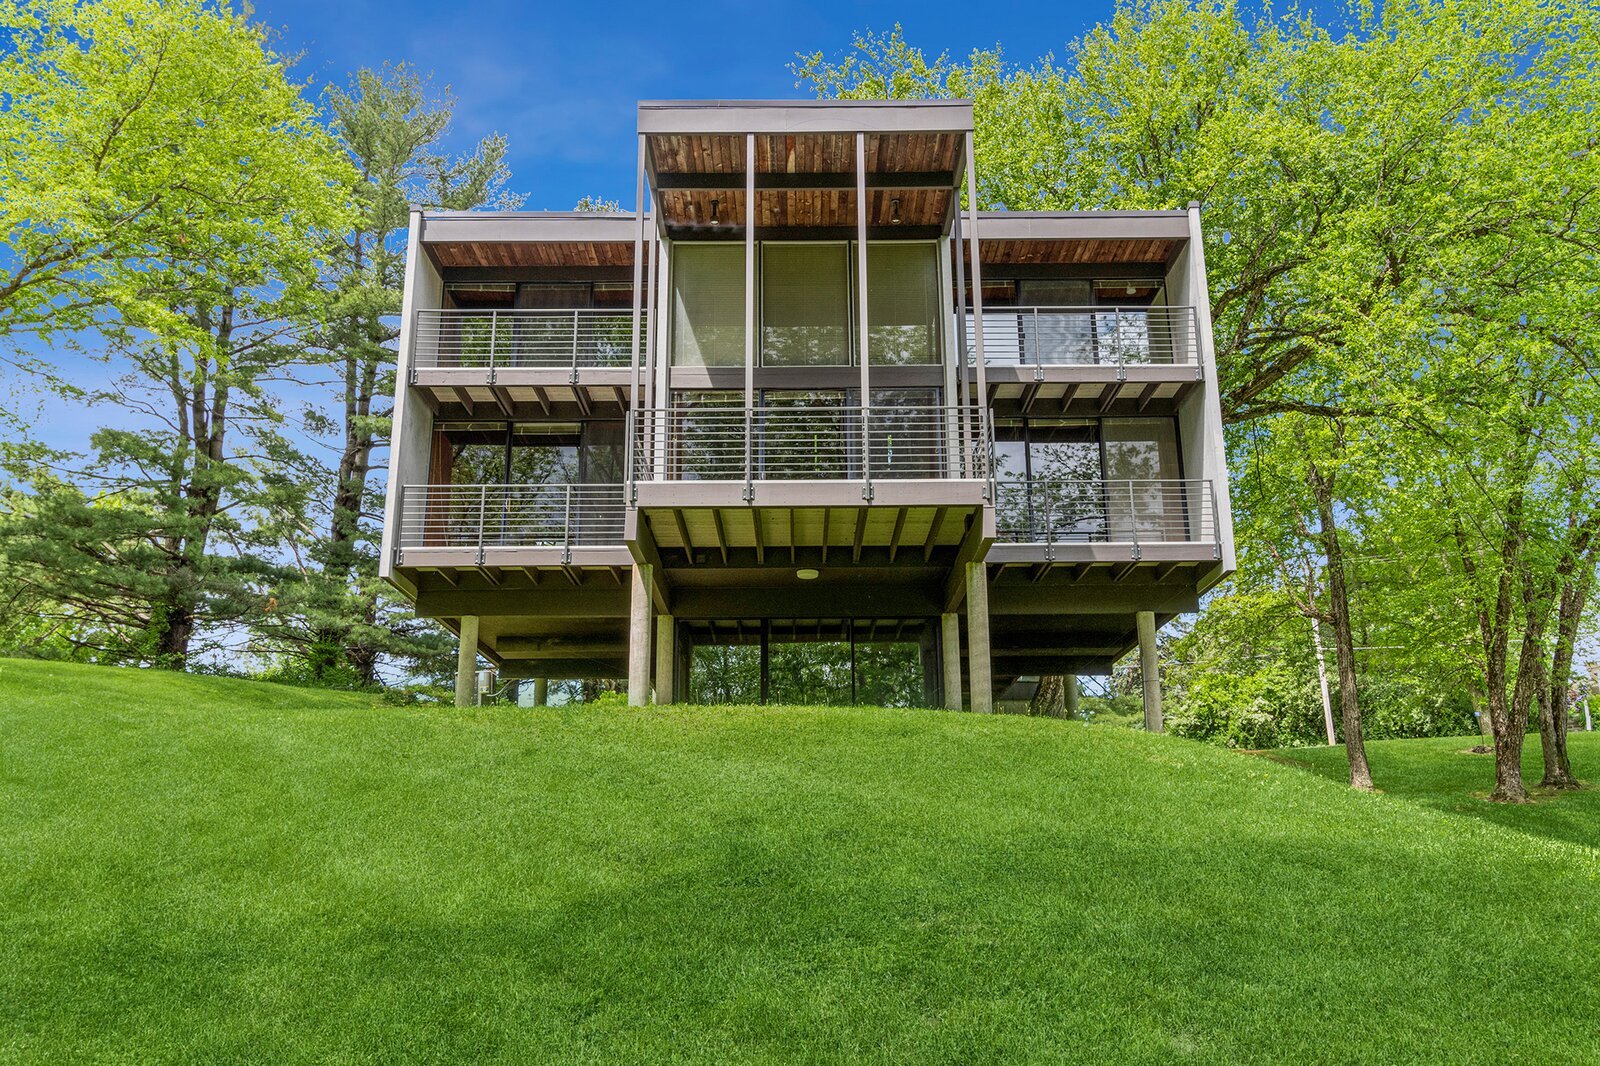 You Can Own an Award-Winning Midcentury Home in the Rolling Hills of Iowa City for $410K